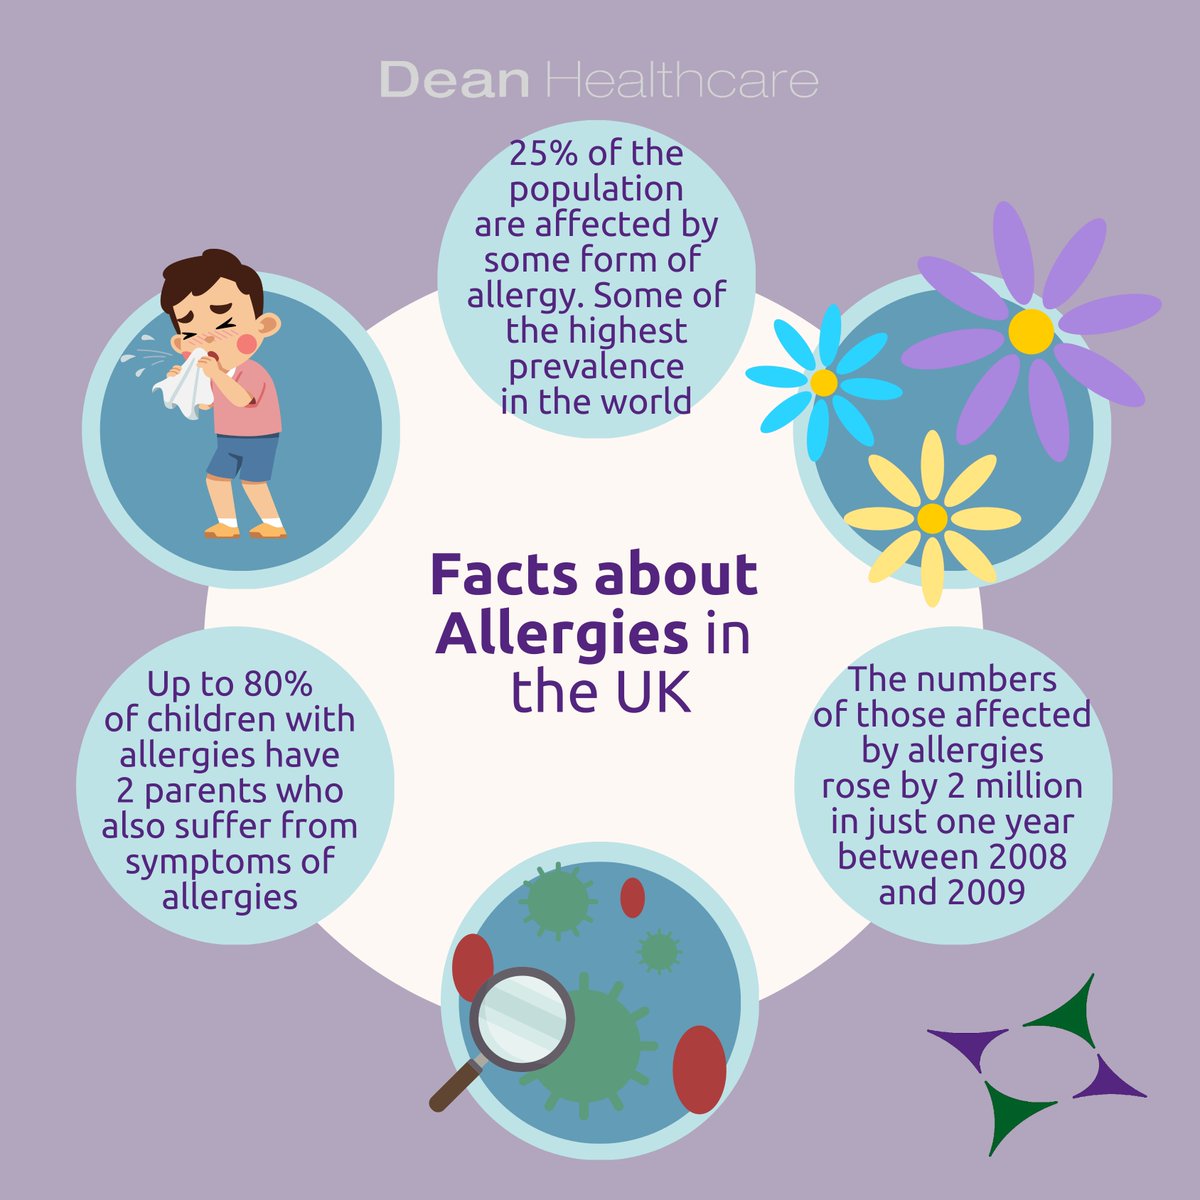 Are you one of the millions affected by allergies in the UK each year? Here are some interesting facts you might not know about those pesky allergies!

#allergy #allergyrelief #allergyfriendly #allergyawareness #healthcare #health #care #awareness #support #wellbeing #welfare